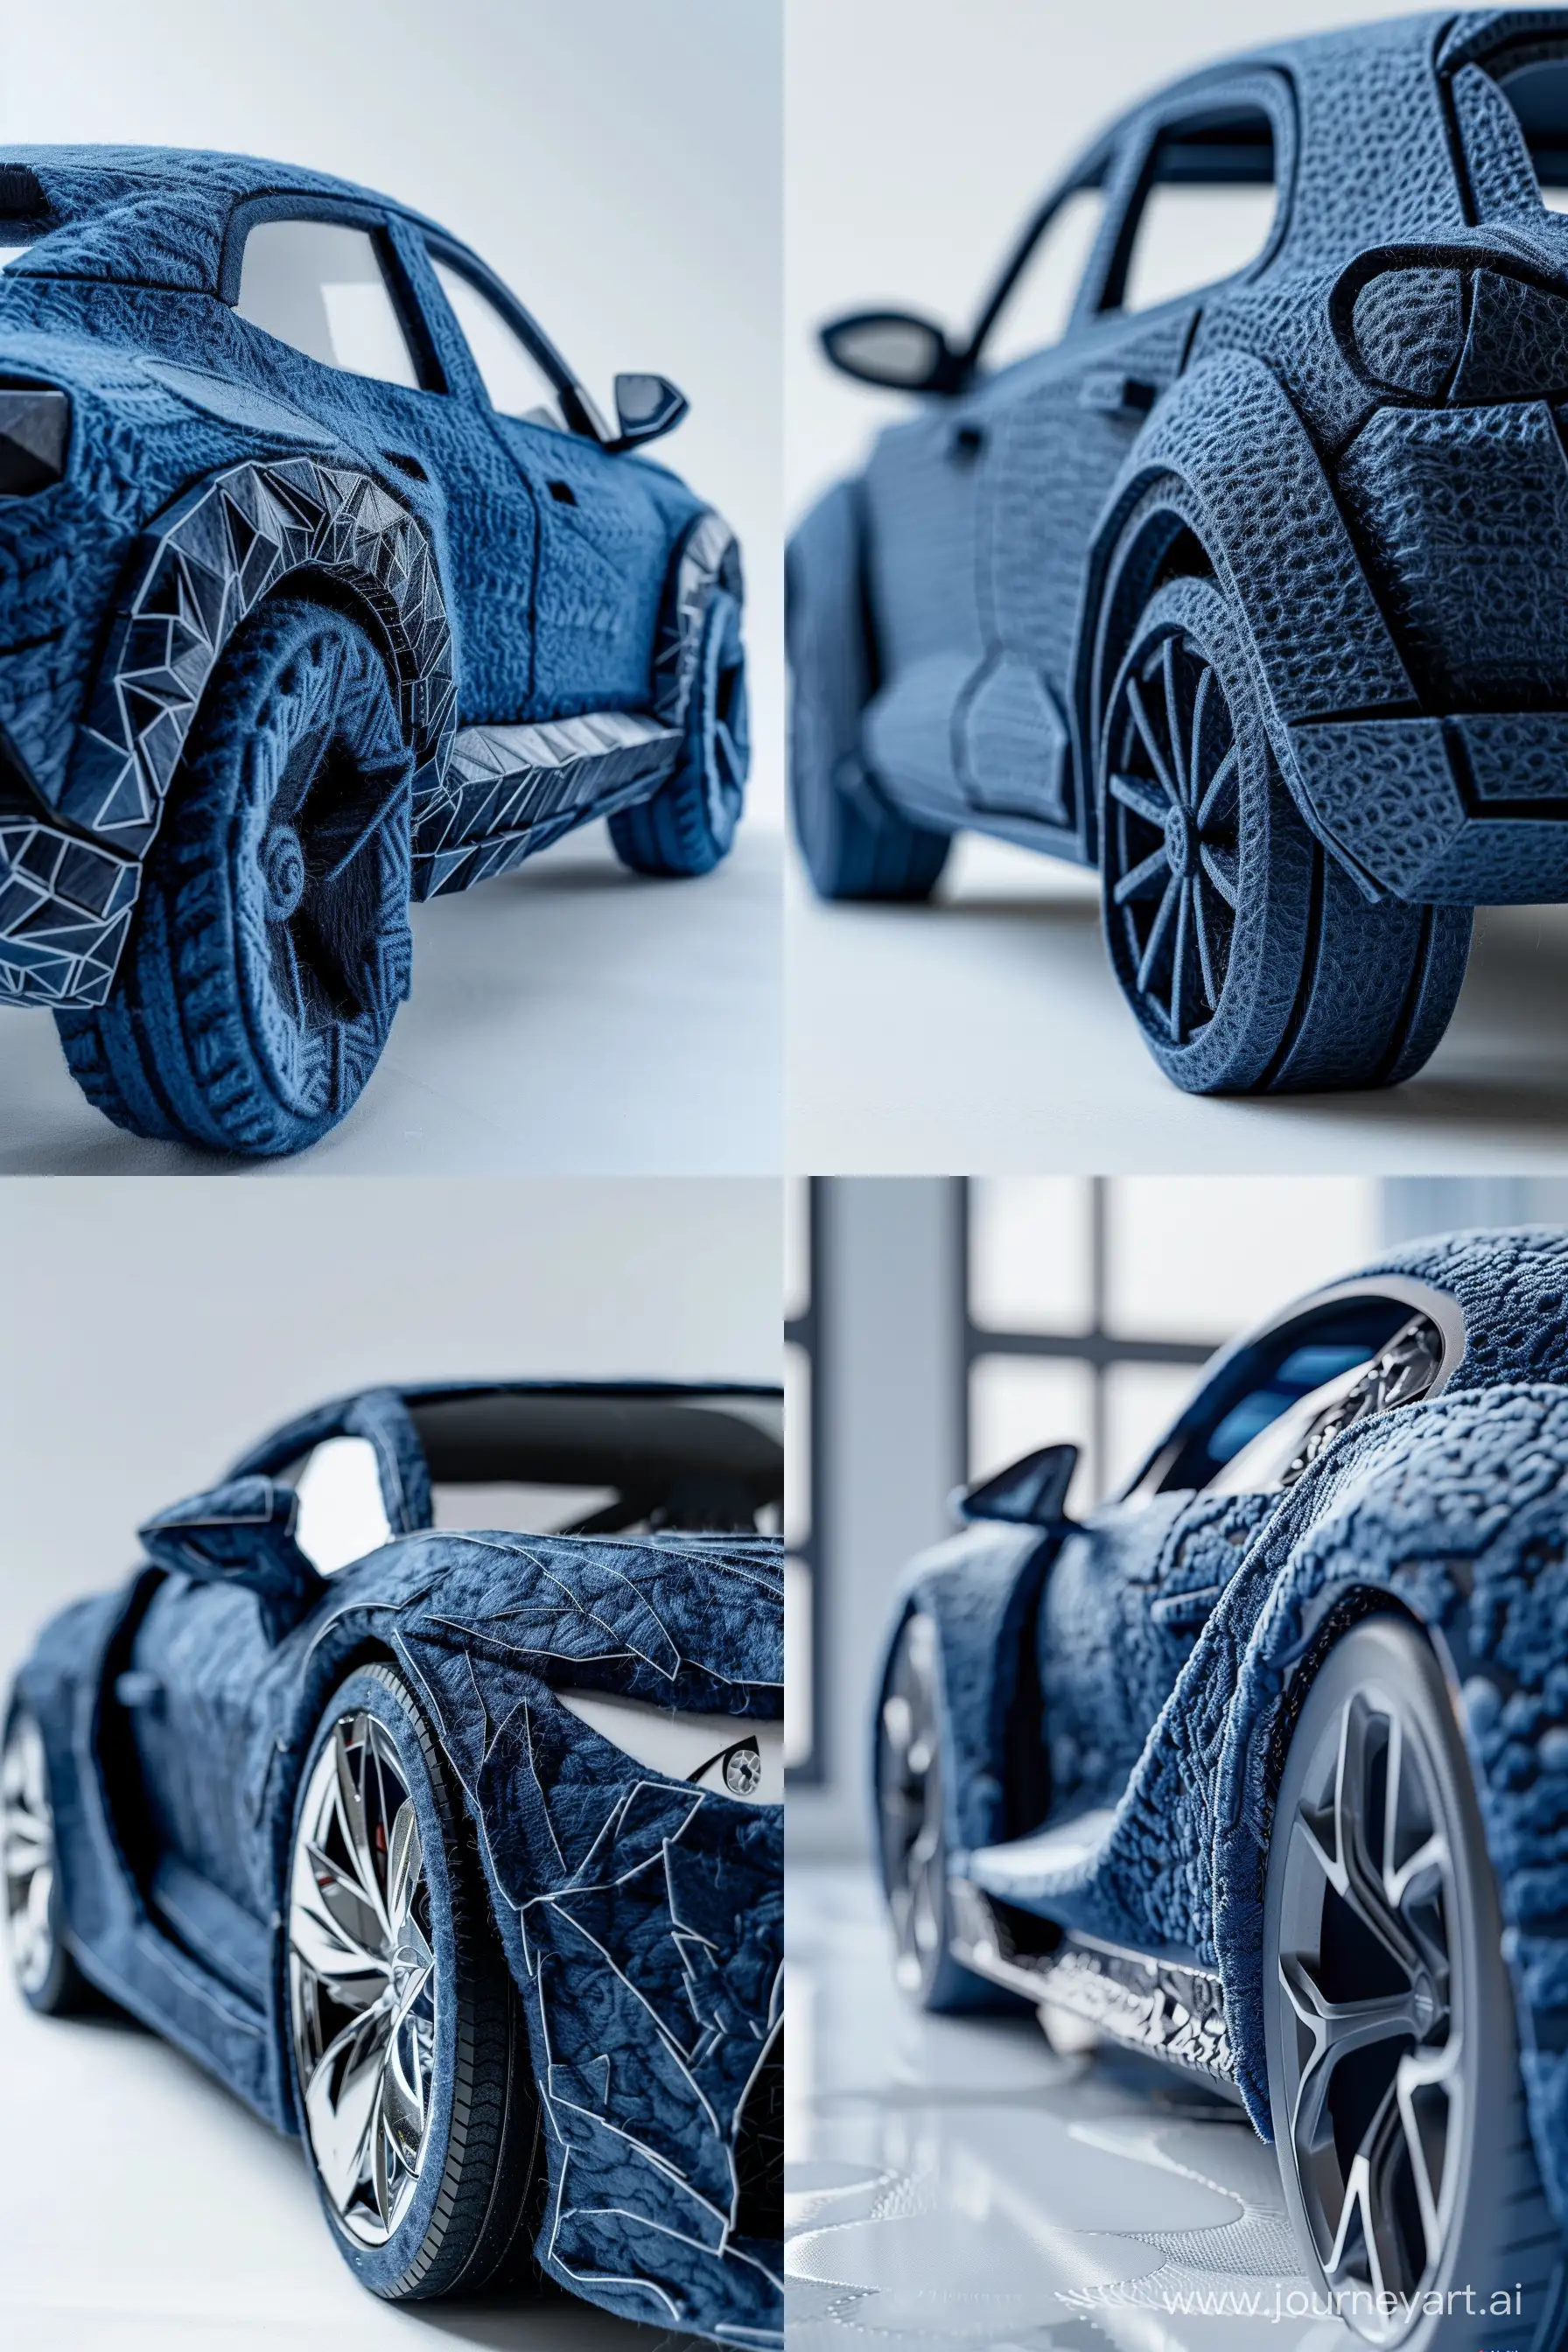 a modern navy blue car intricate image, full body, cute, cool, it is made of wool texture muppet image, wool craftsmanship, realistic fine details, conceptual embroidery, light blue color as embellishments, strong close-ups, paper sculptures, surrealistic object illustrations, intricate details and textures, uhd --style raw --v 6 --ar 2:3